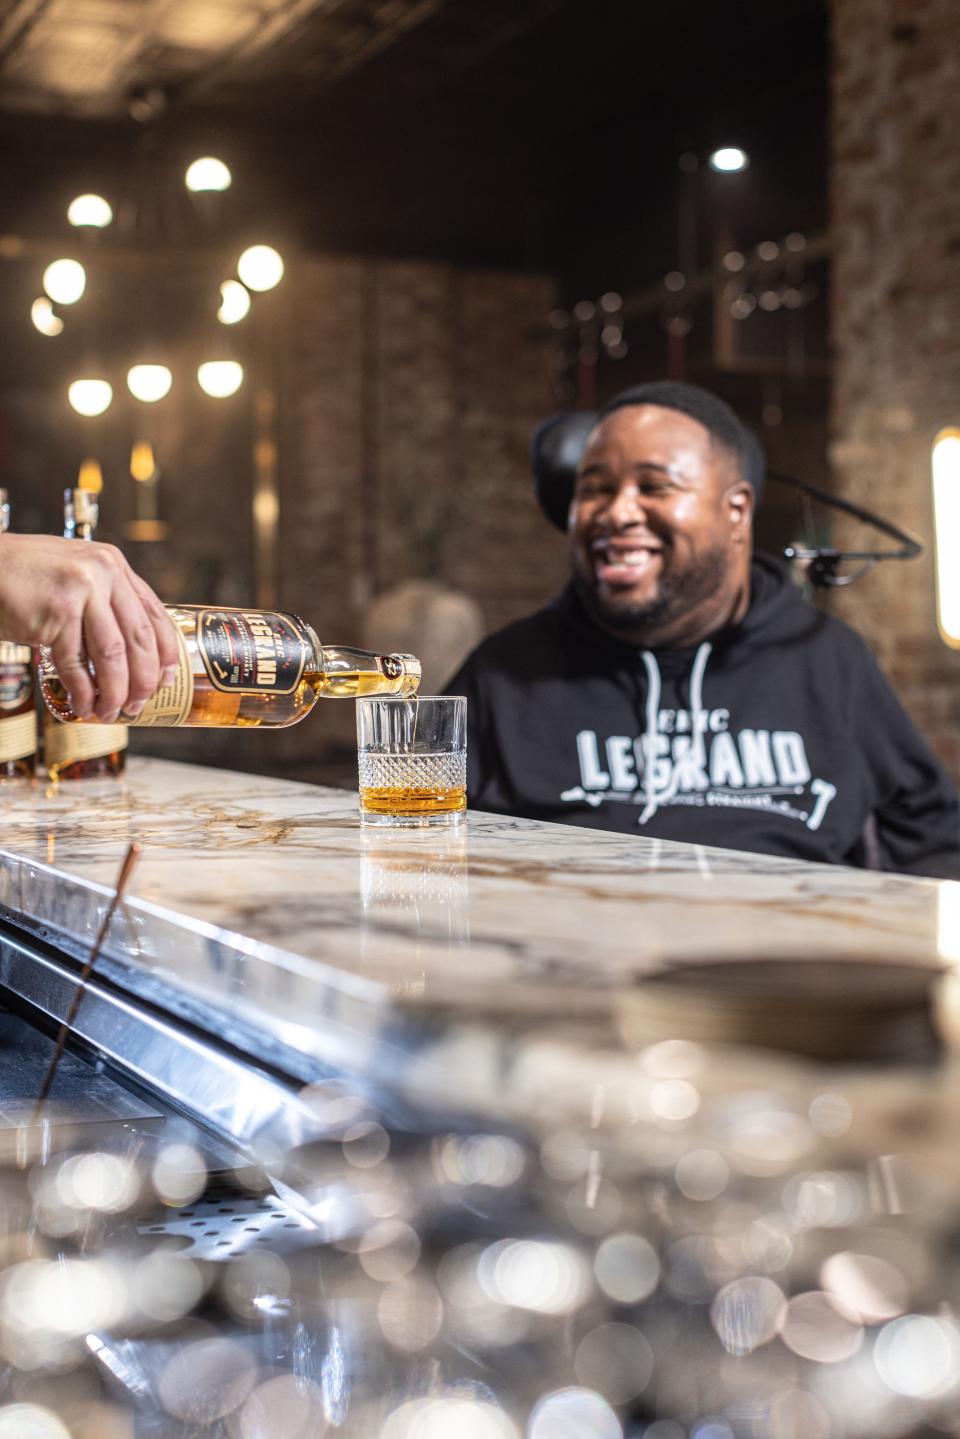 Former Rutgers University Scarlet Knight Eric LeGrand celebrates the one year anniversary of Eric LeGrand Kentucky Straight Bourbon Whiskey more than a decade after a paralyzing football injury.